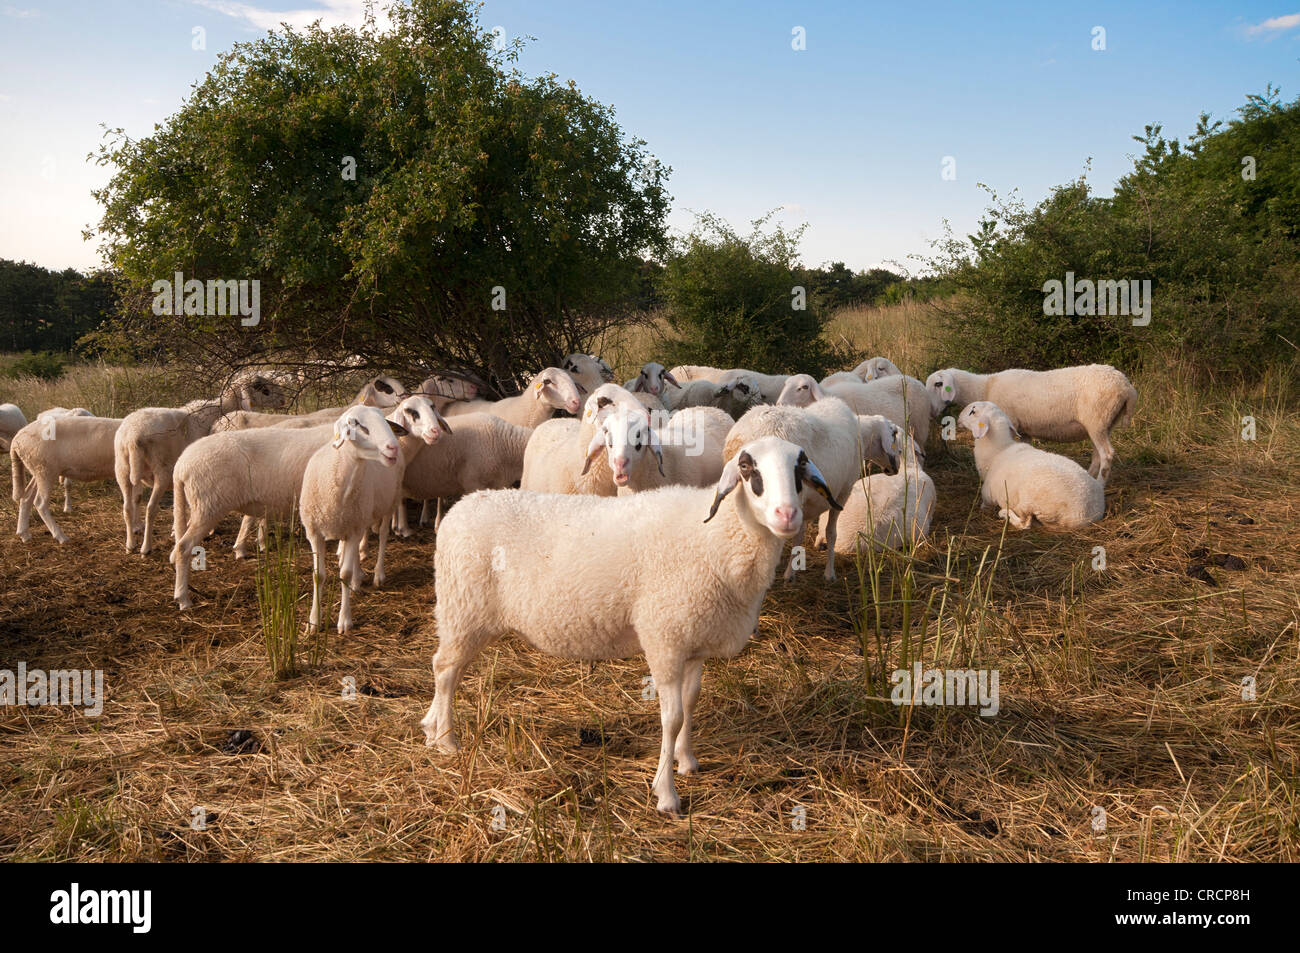 Domestic sheep for heath preservation, Perchtoldsdorf Heath, Perchtoldsdorf, Lower Austria, Austria, Europe Stock Photo